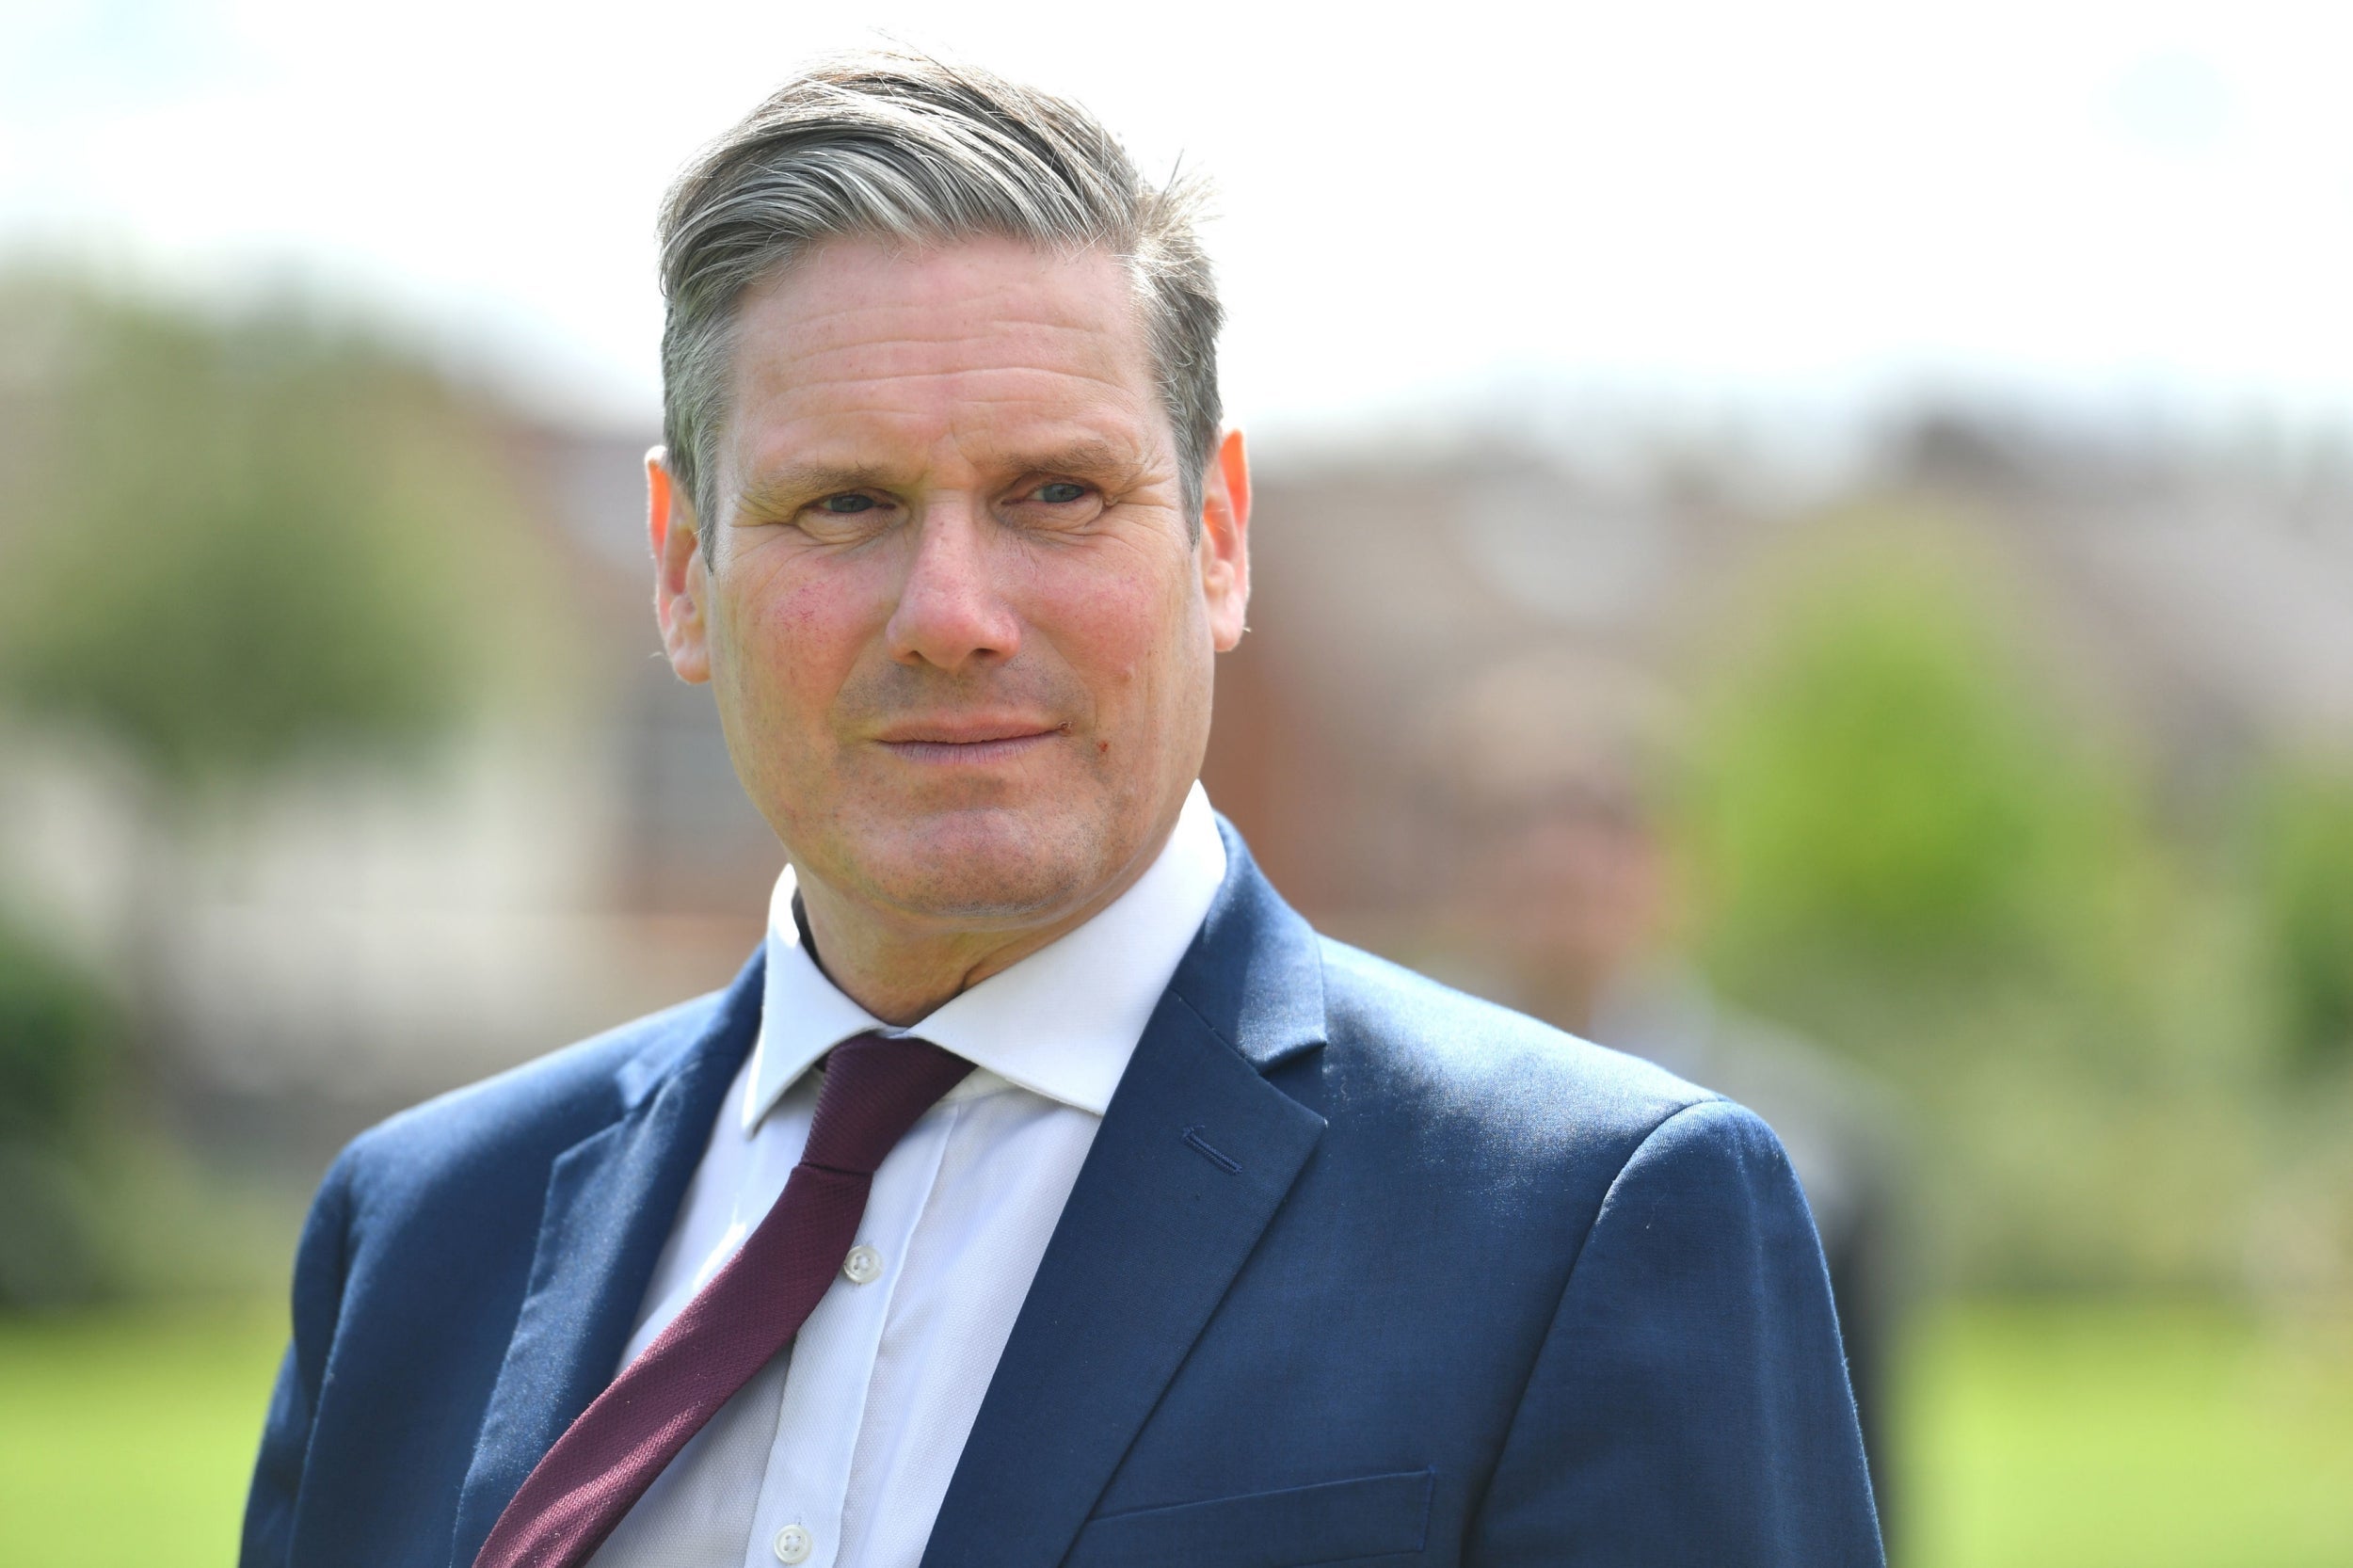 Labour Party leader, Keir Starmer, highlighted that Johnson’s repeated denials and lies surrounding the Downing Street lockdown gatherings should trigger his resignation.